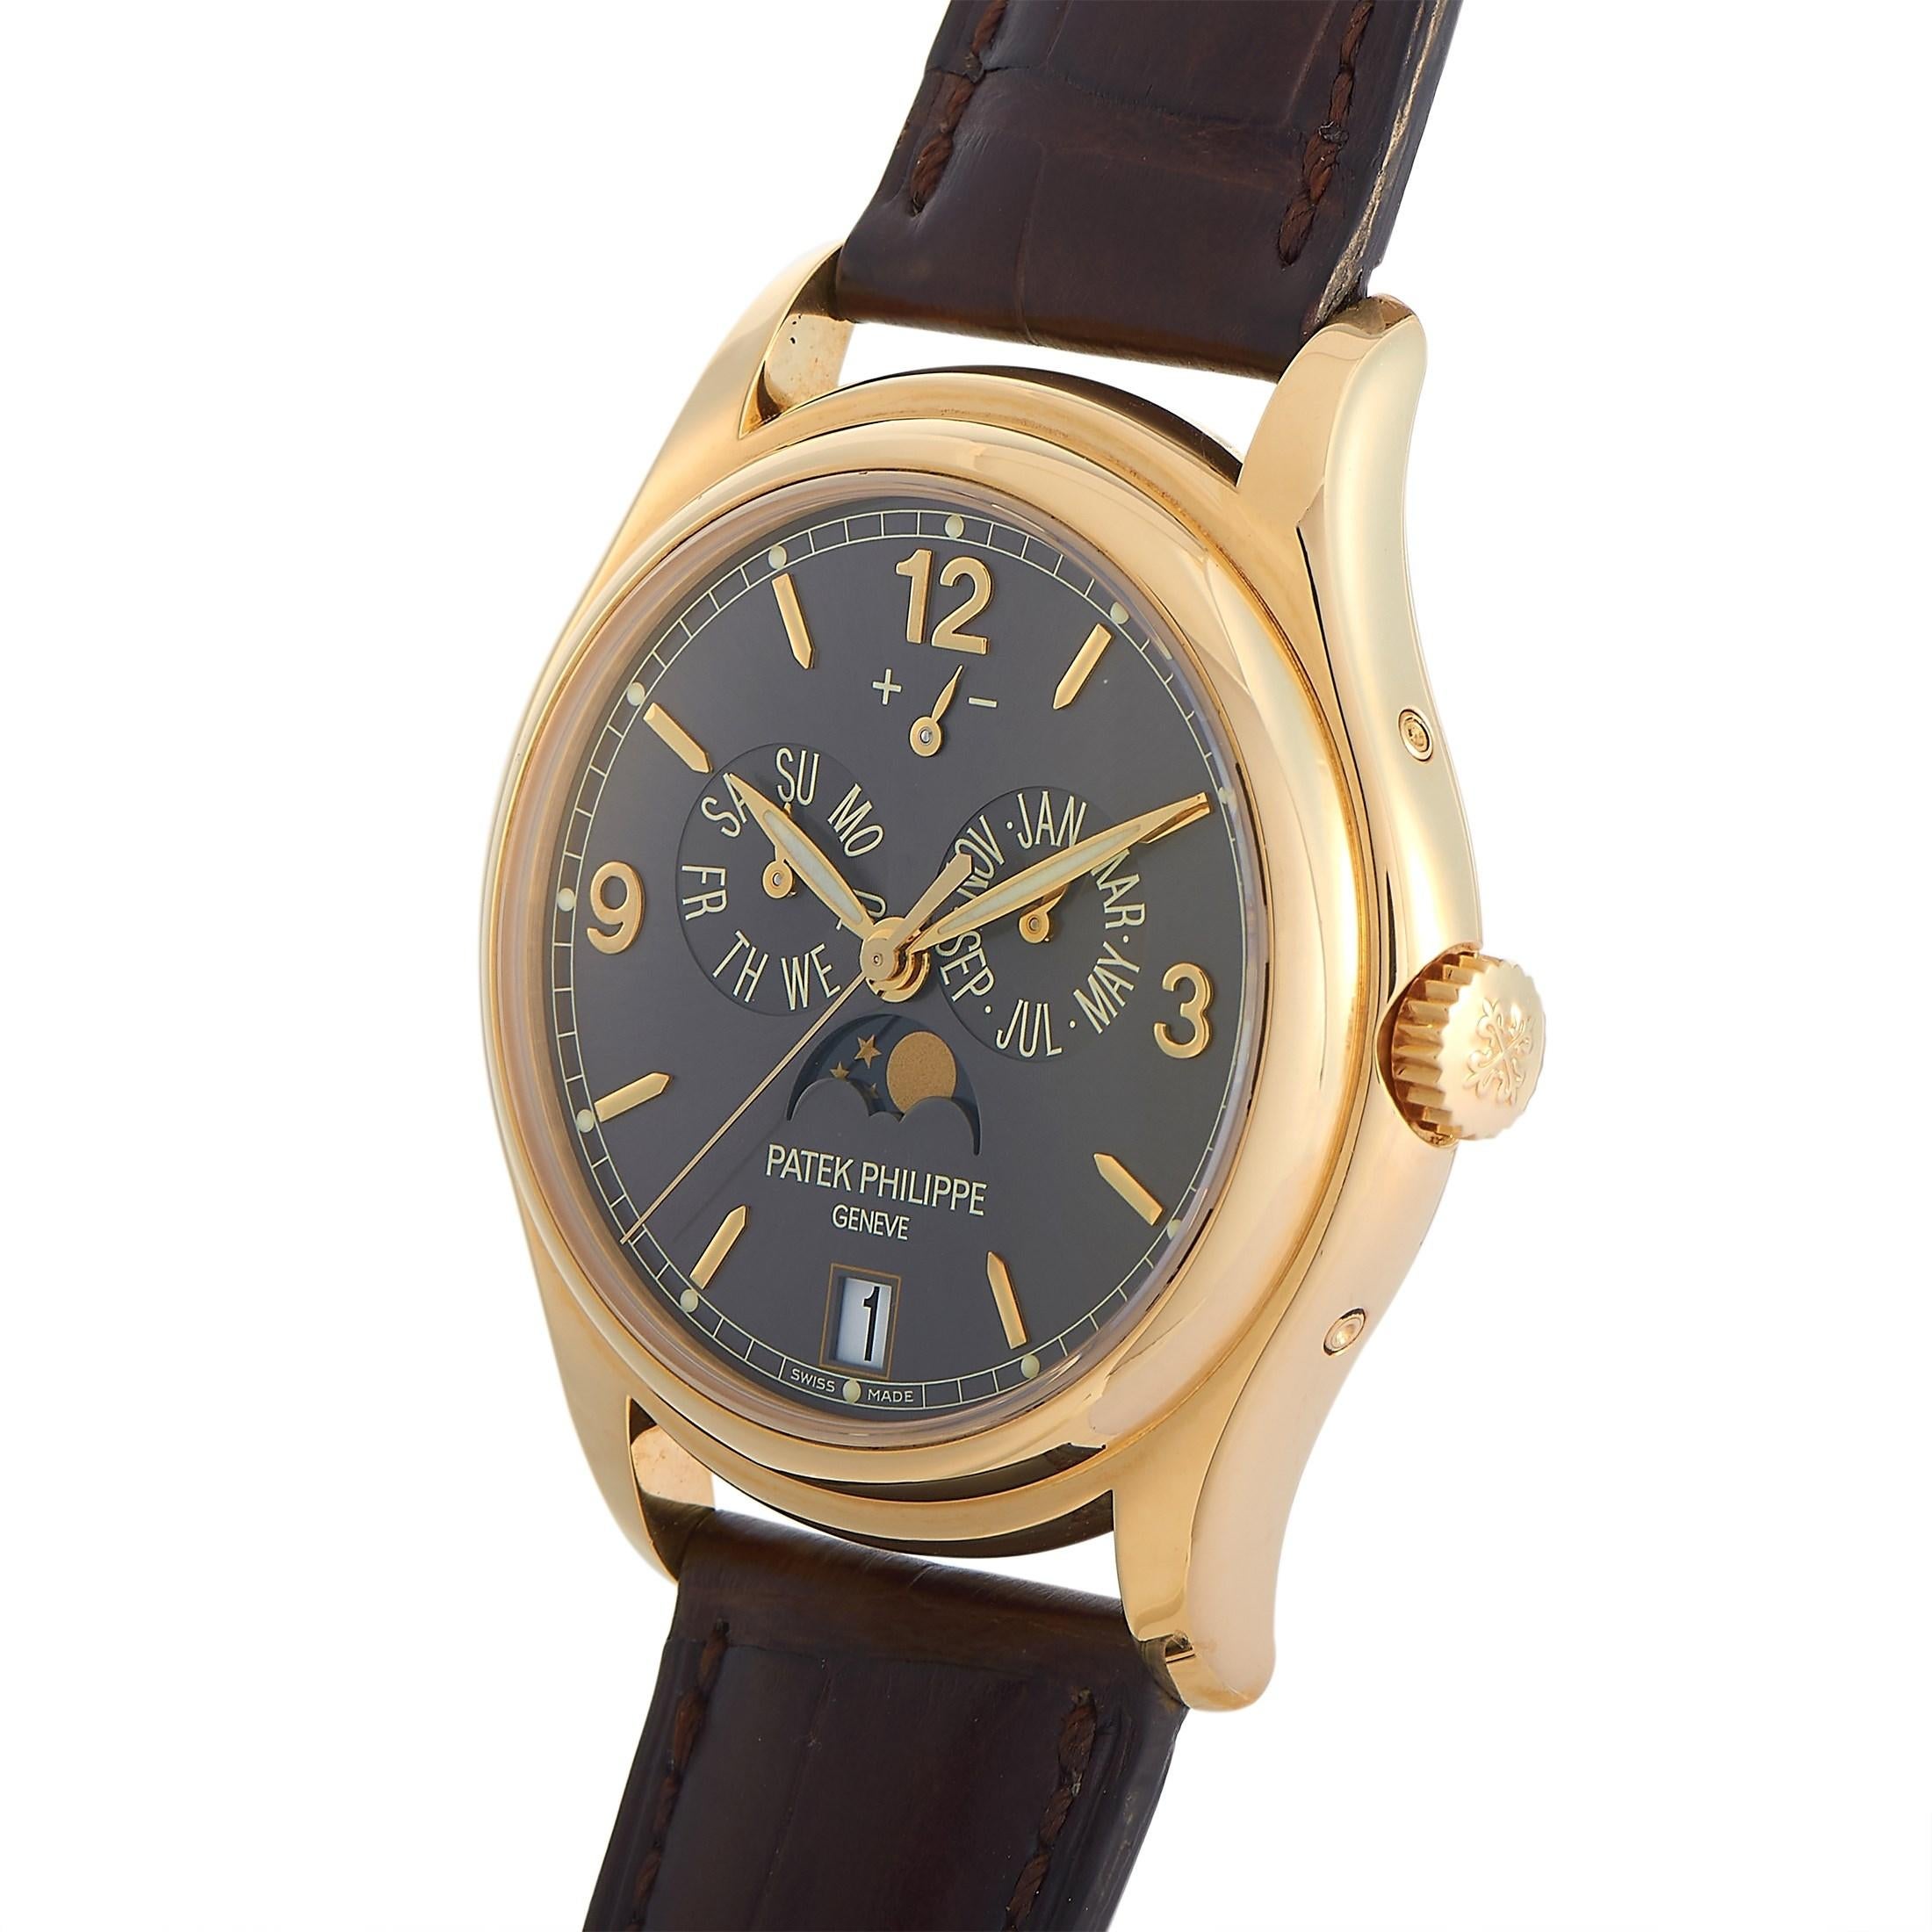 The Patek Philippe Annual Calendar Watch, reference number 5146J, is one of the watchmaker’s most popular designs.

This watch perfectly combines sleek design with exceptional functionality. The 18K Yellow Gold case measures 39mm and houses a